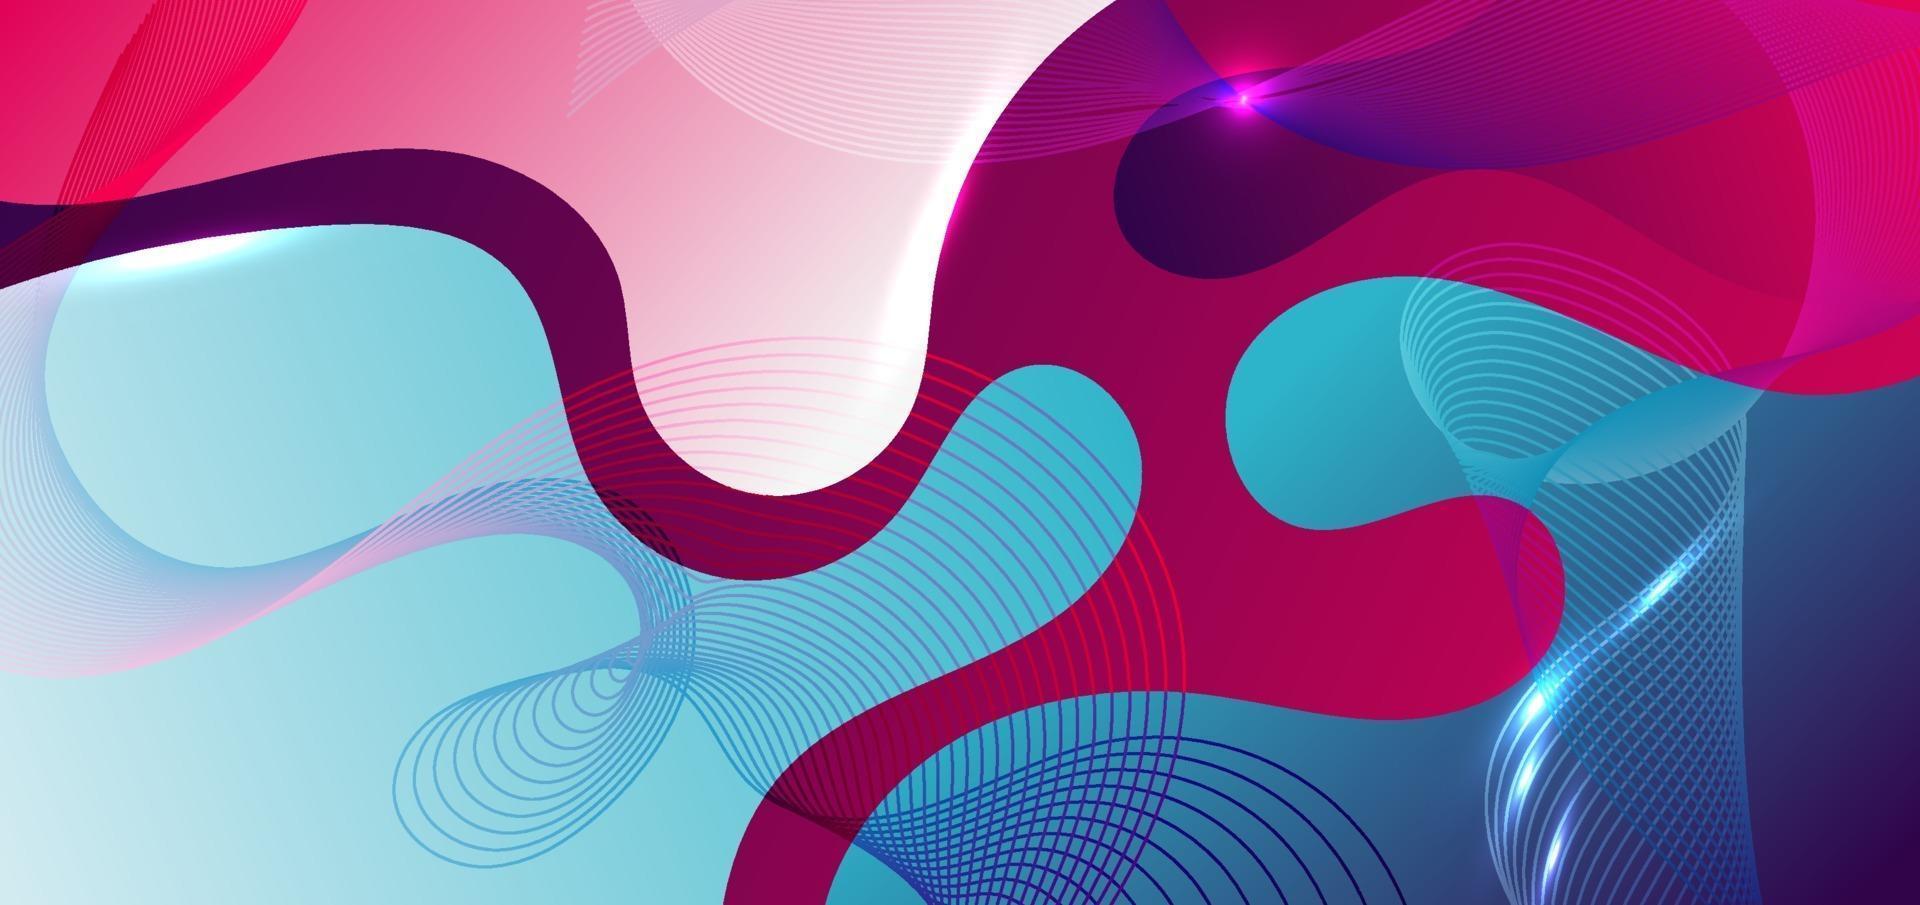 Abstract fluid shape blue and pink gradient background with wave line element. vector